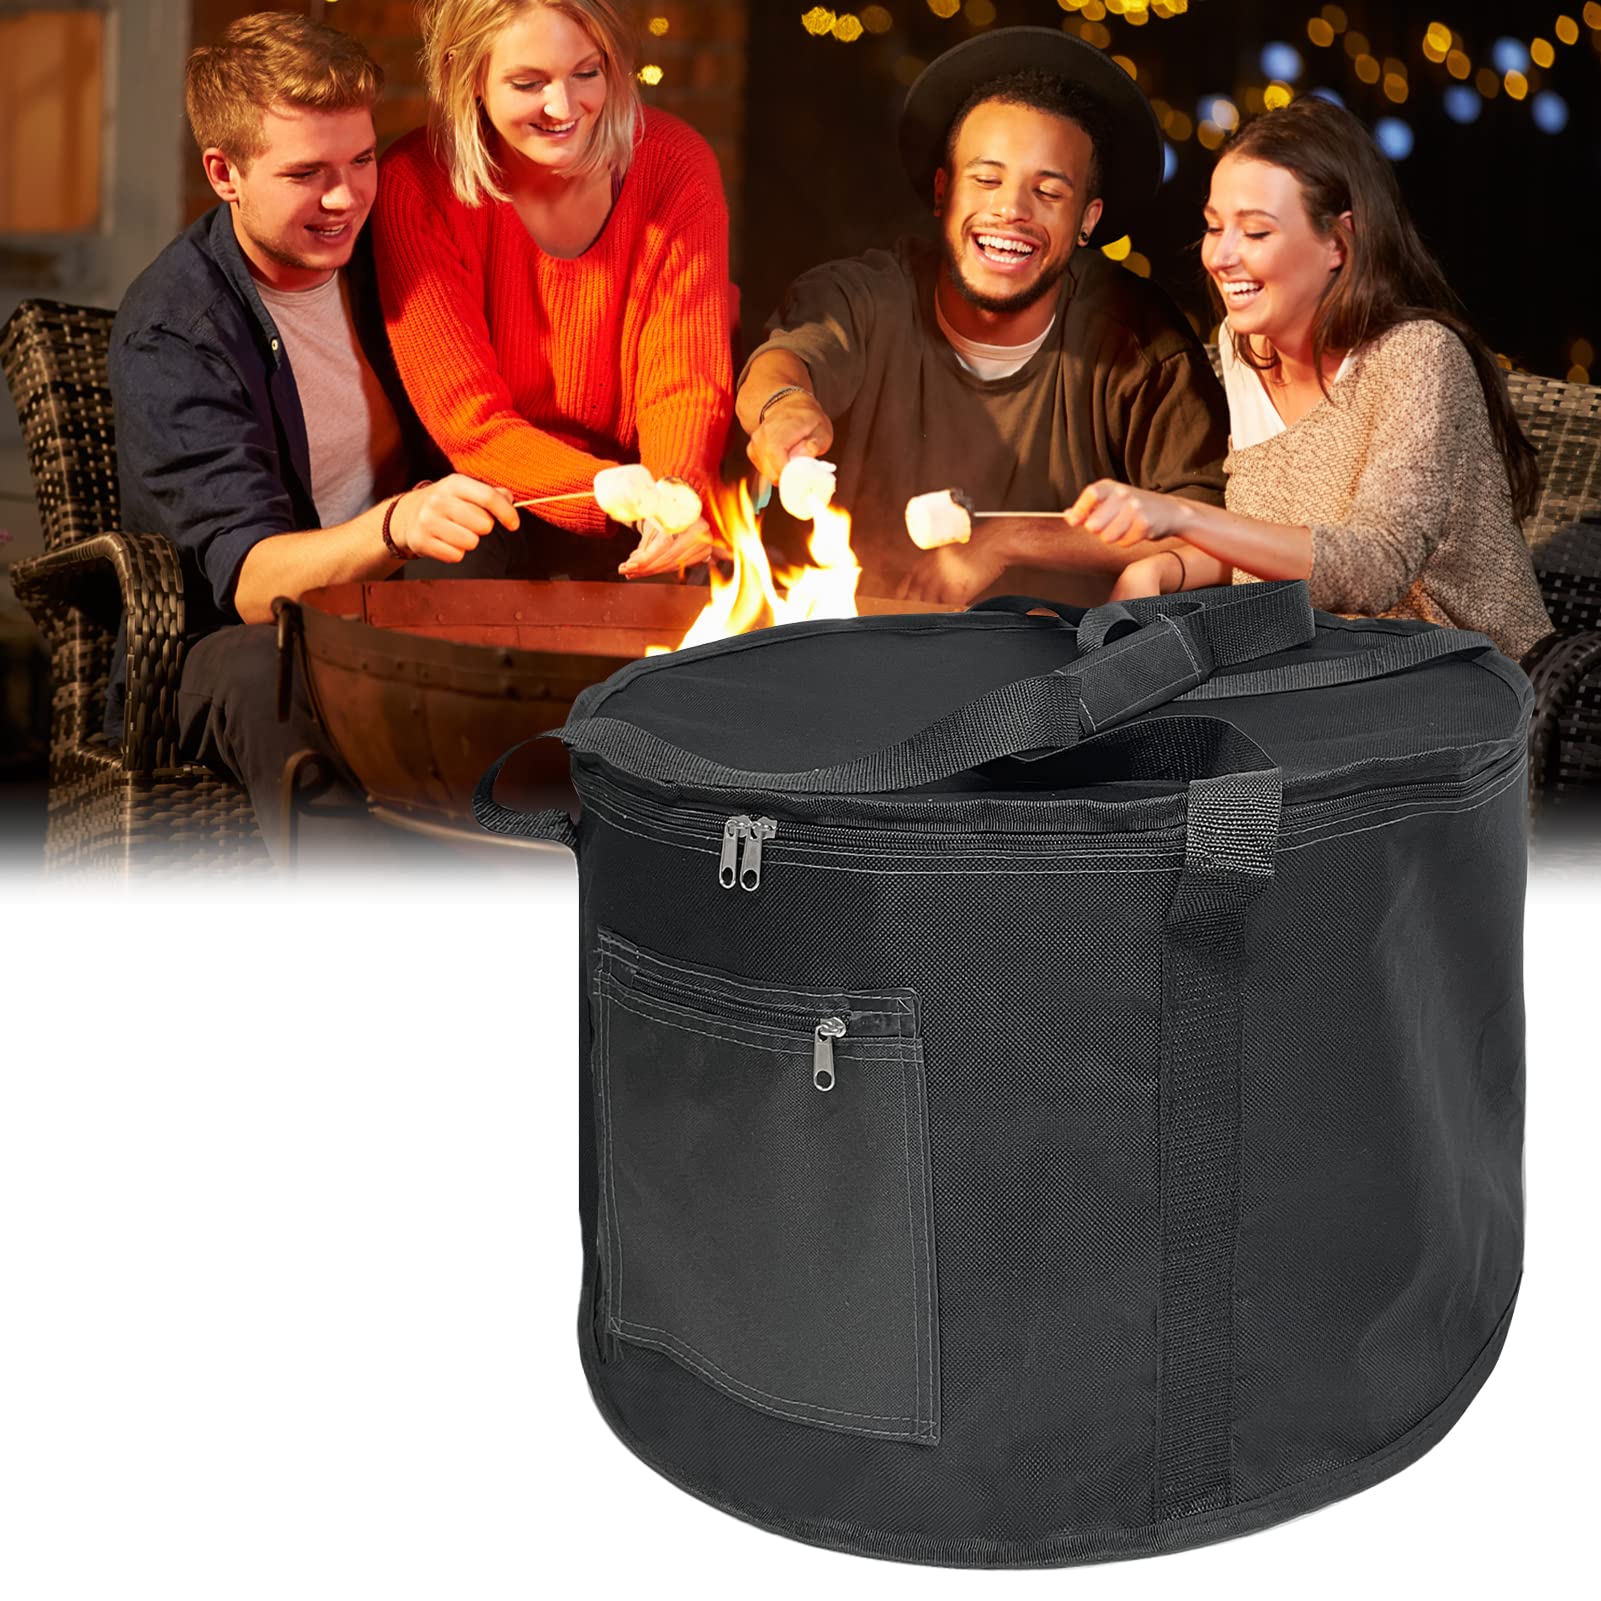 Gas Fire Pit bag 19-In Fire Pit Bag, Upgrade Fire Bowl Carry Bag Compatible with Outland Firebowl 893 870 823 Propane Gas Fire Pit for RV Travel & Camping Accessories, Black,Tolare